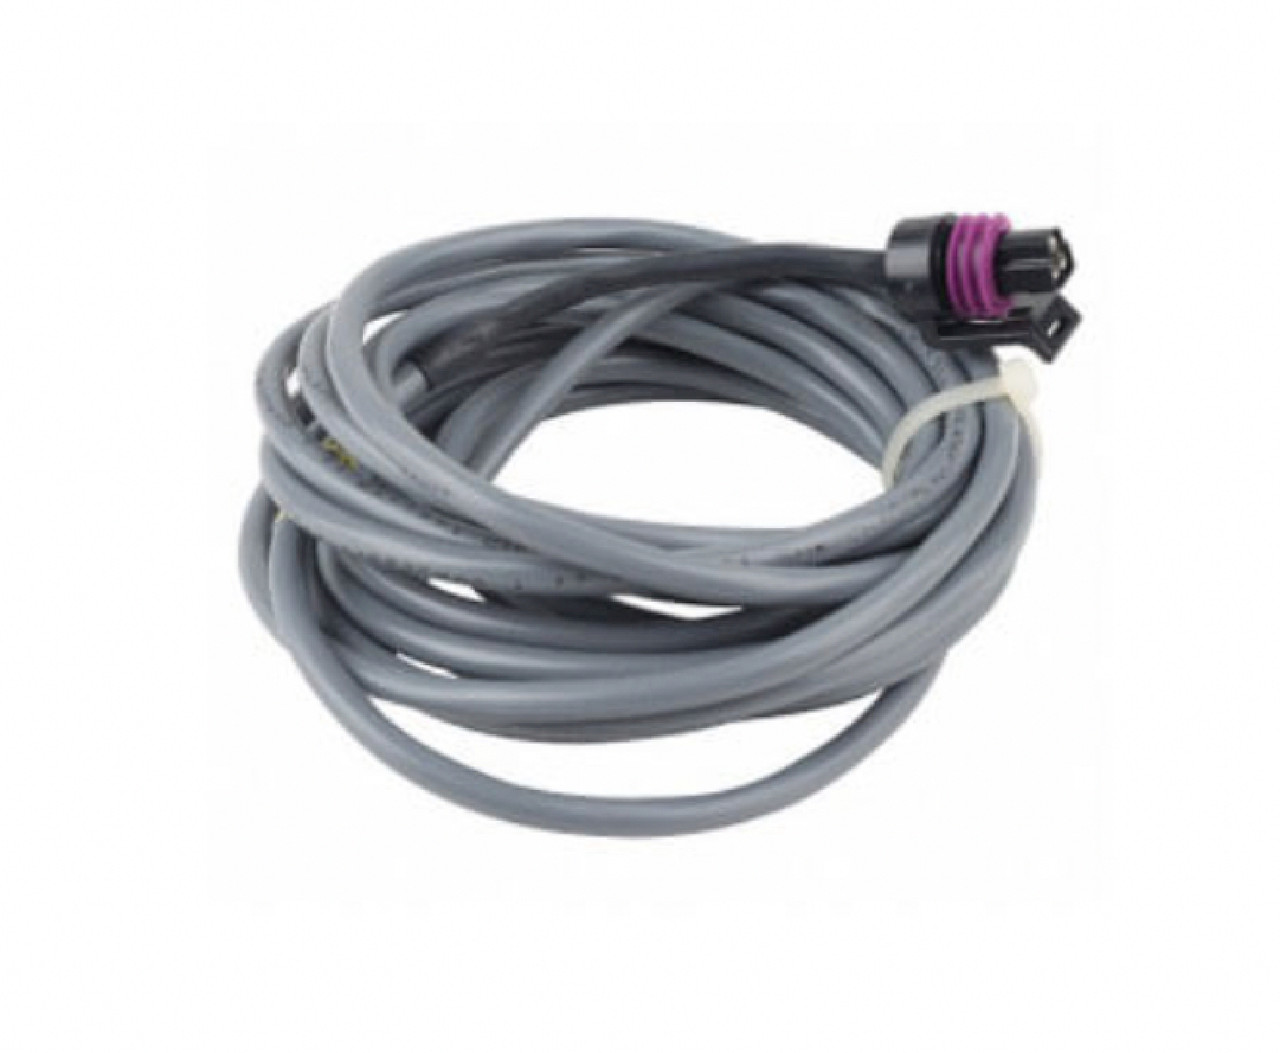 Johnson Controls WHA-P399-200C 6.5' Wire Harness w/ Pig Tails for P399 [New]